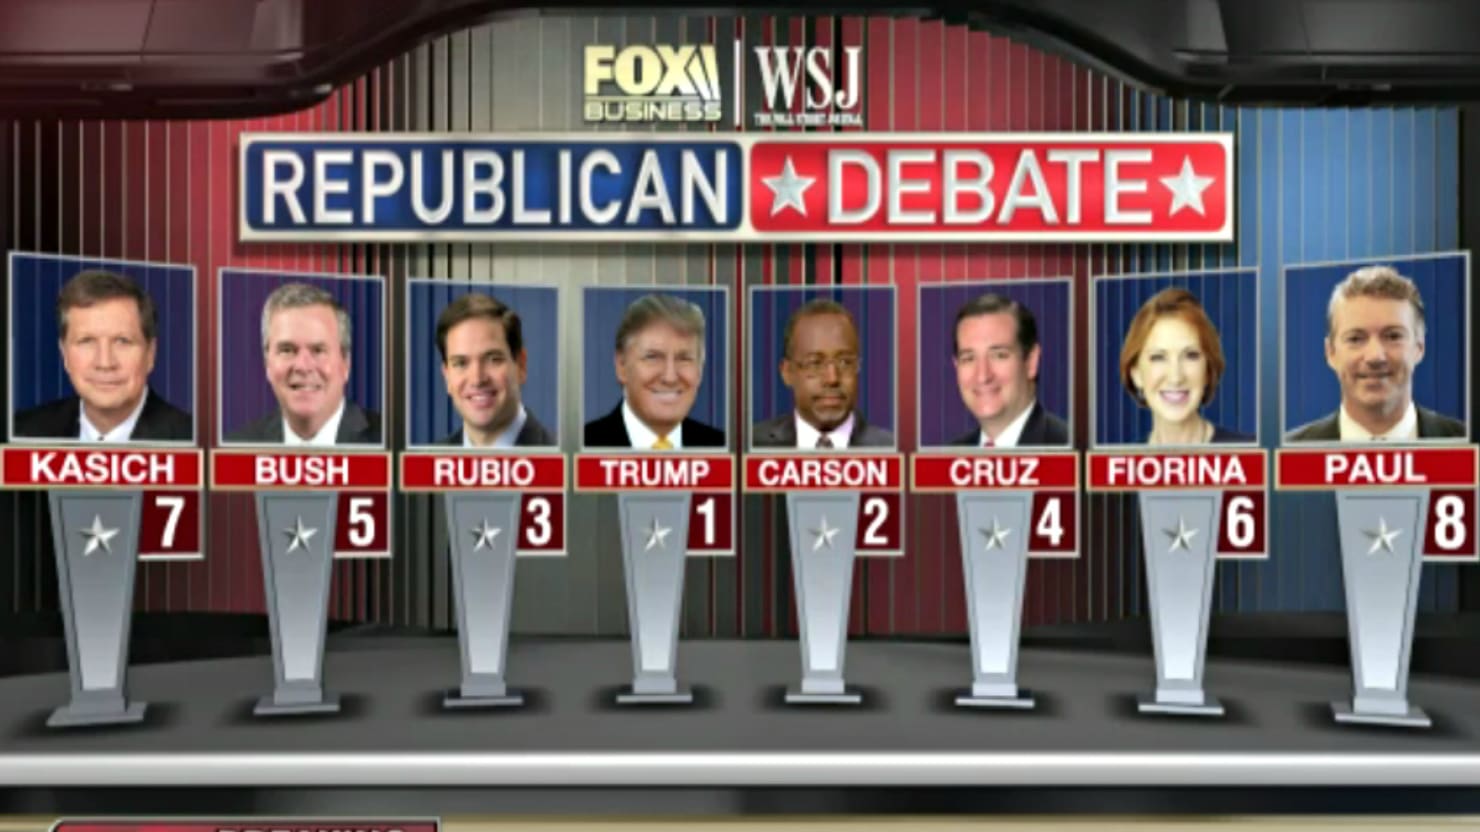 How to Watch the Fox Business Republican Debate Live Stream Online1480 x 832